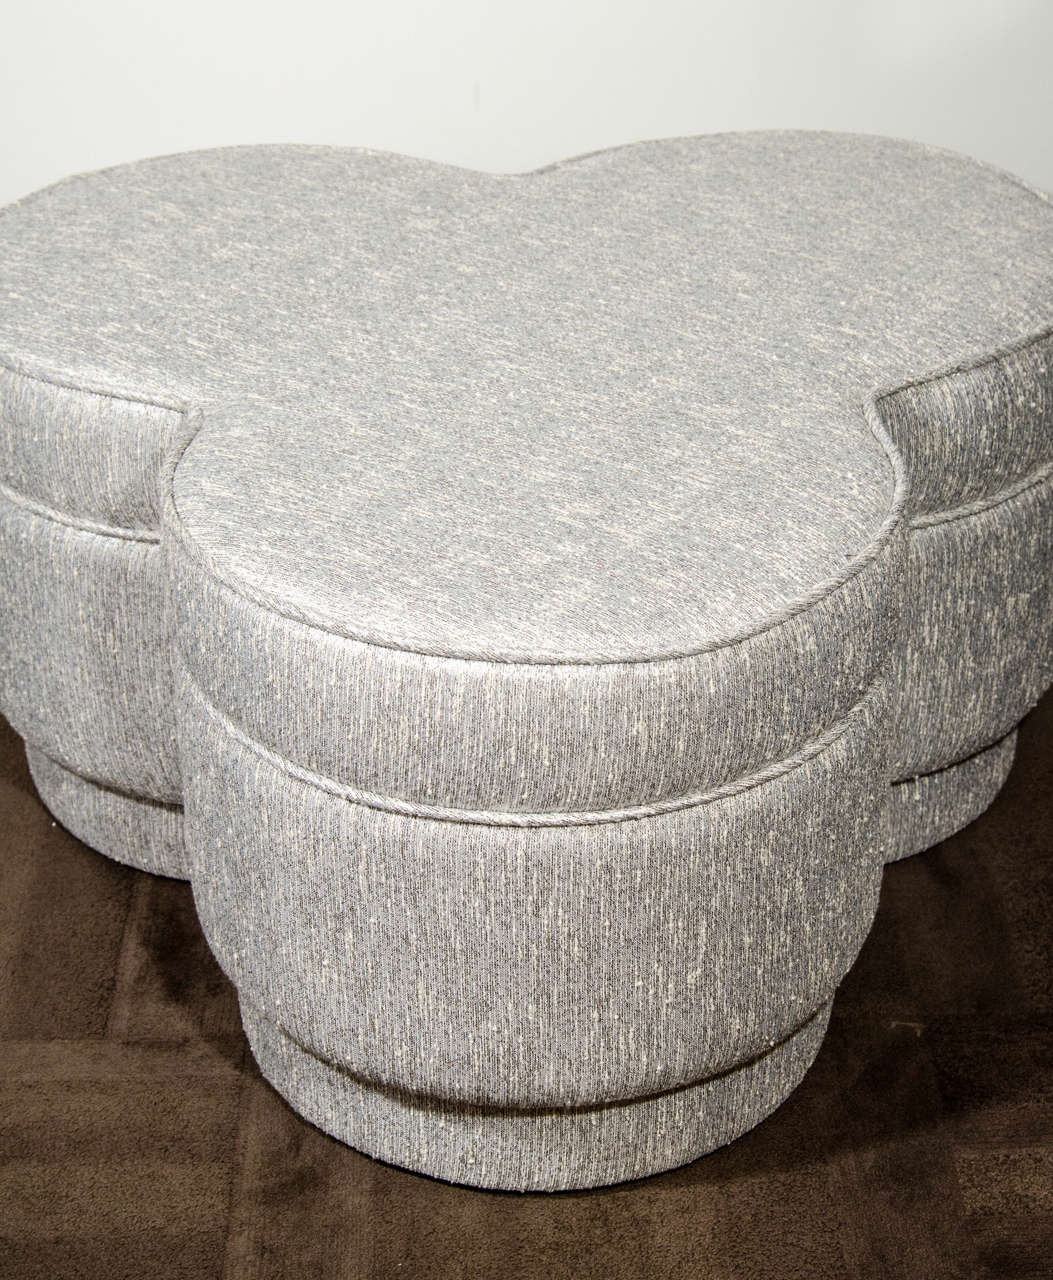 American 1940's Luxe Hollywood Ottoman/Pouf with Stylized Trefoil Design